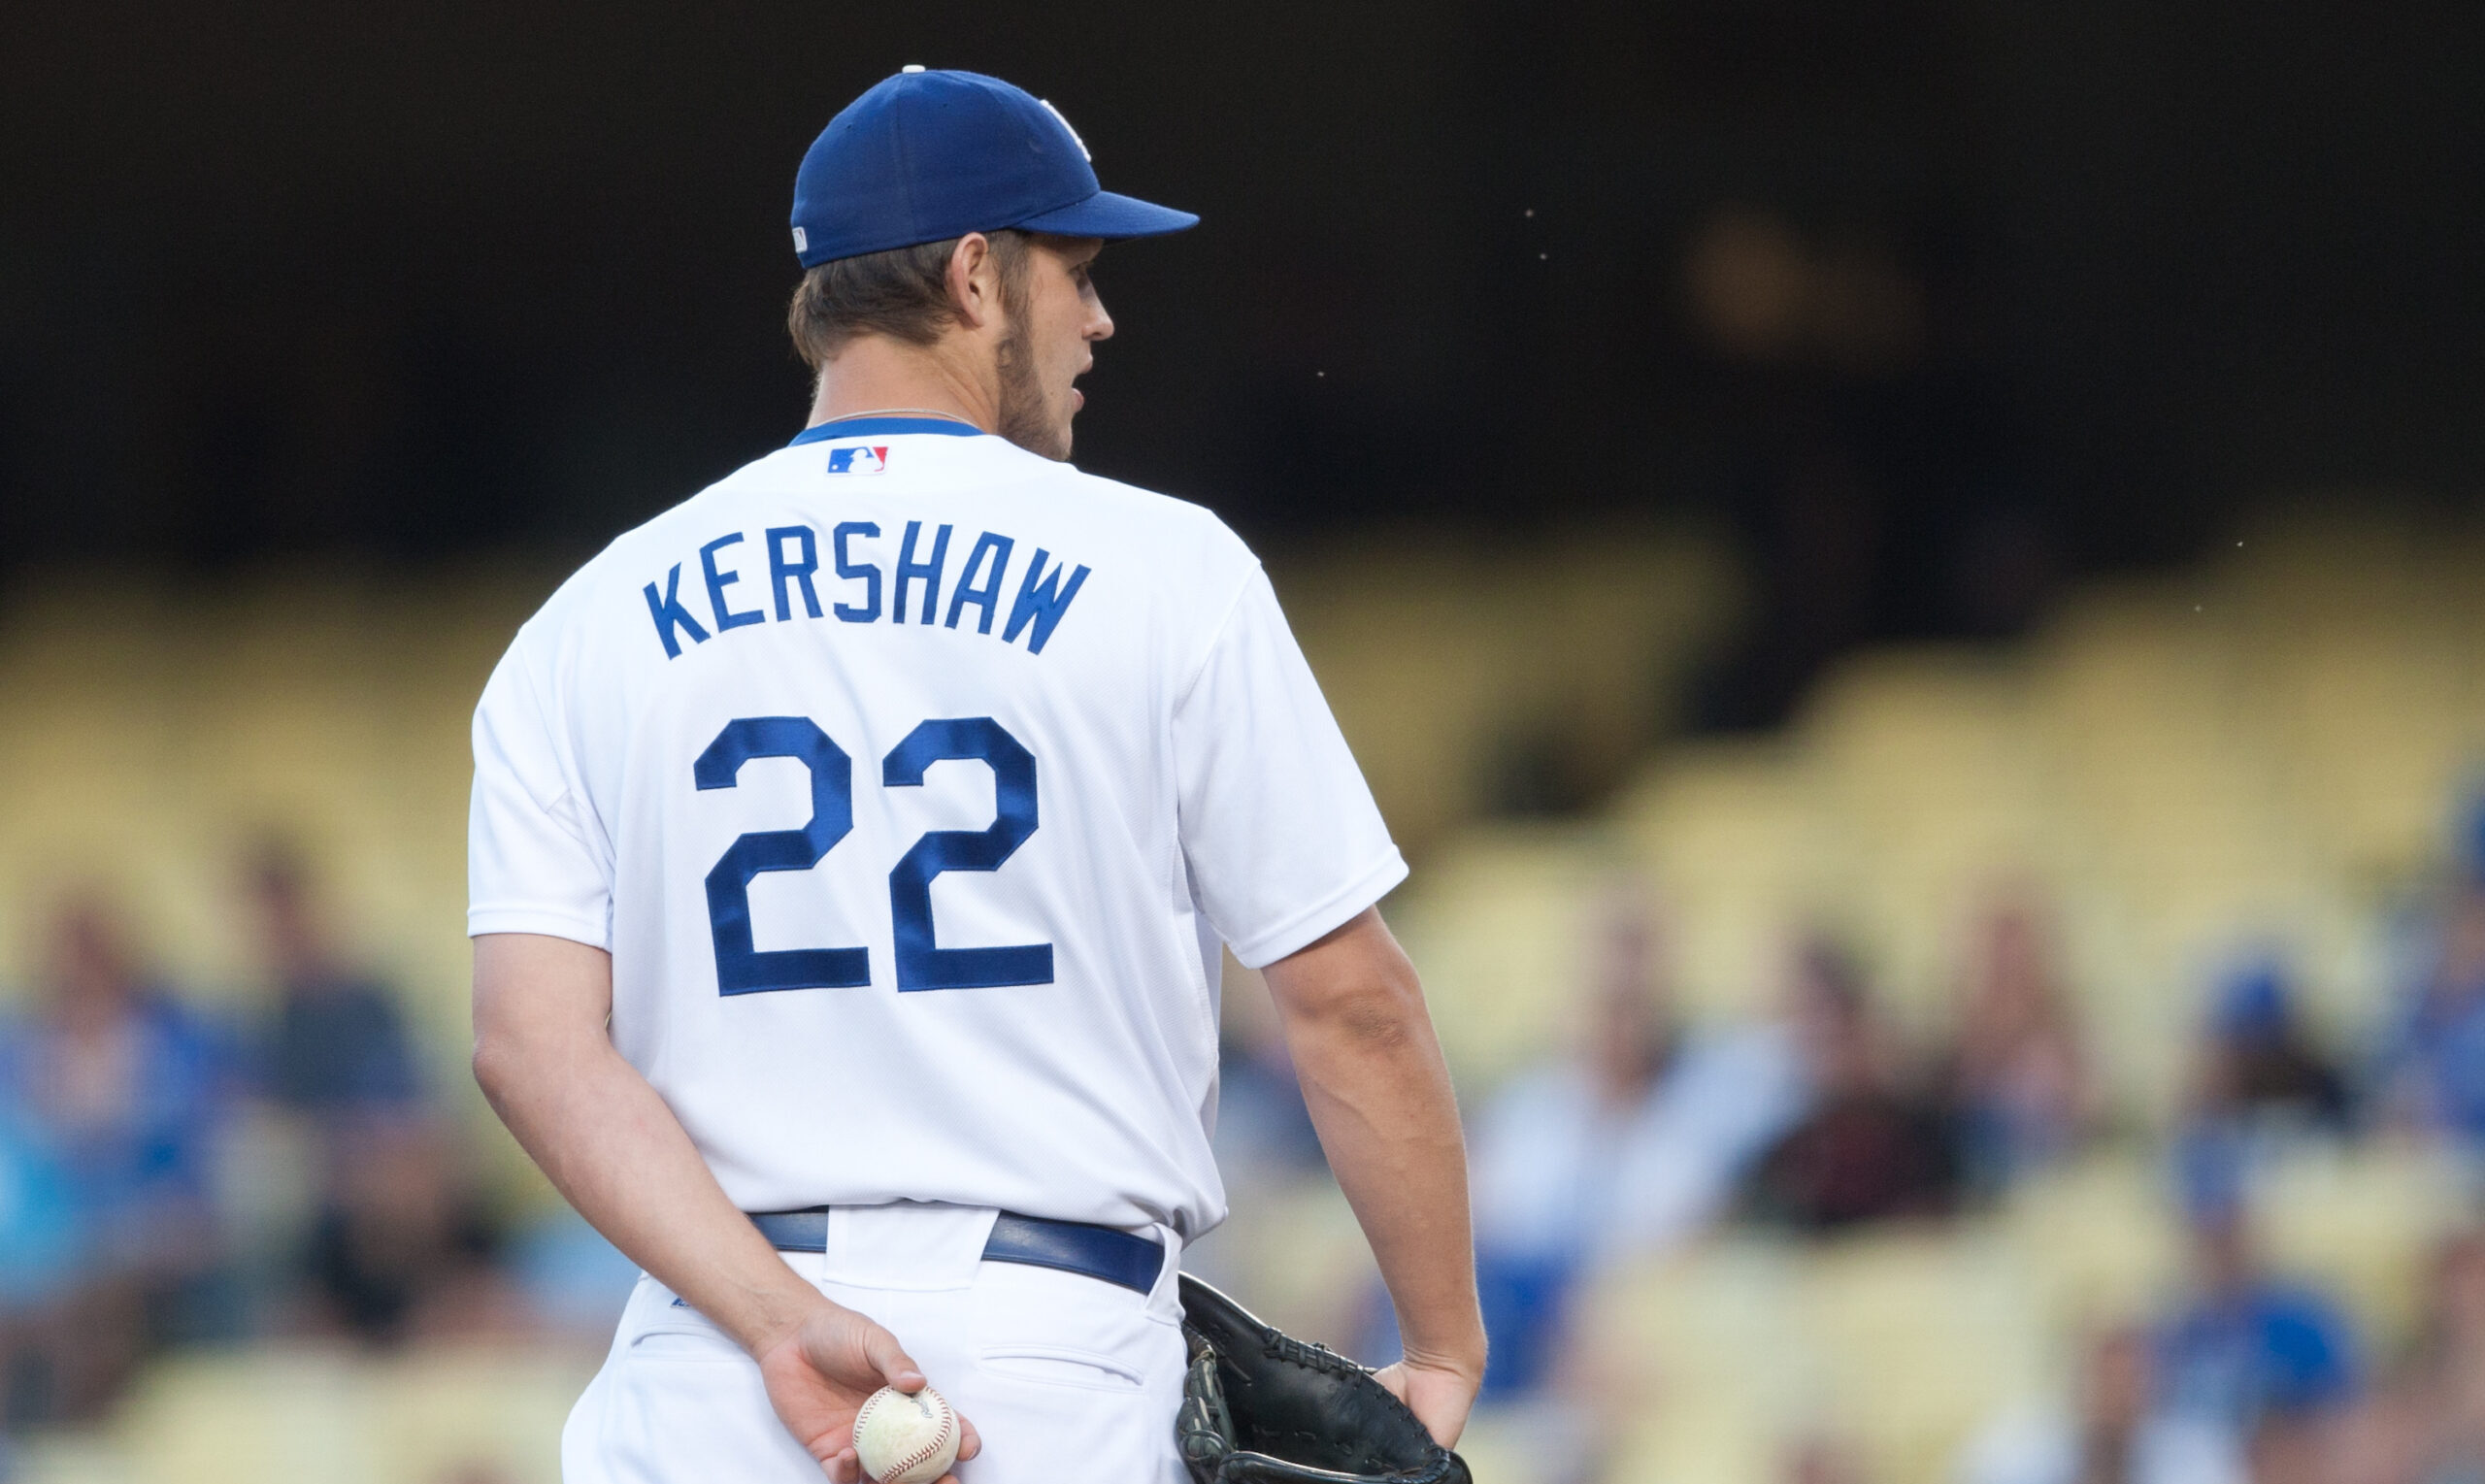 Kershaw Family and Friends Making a Difference